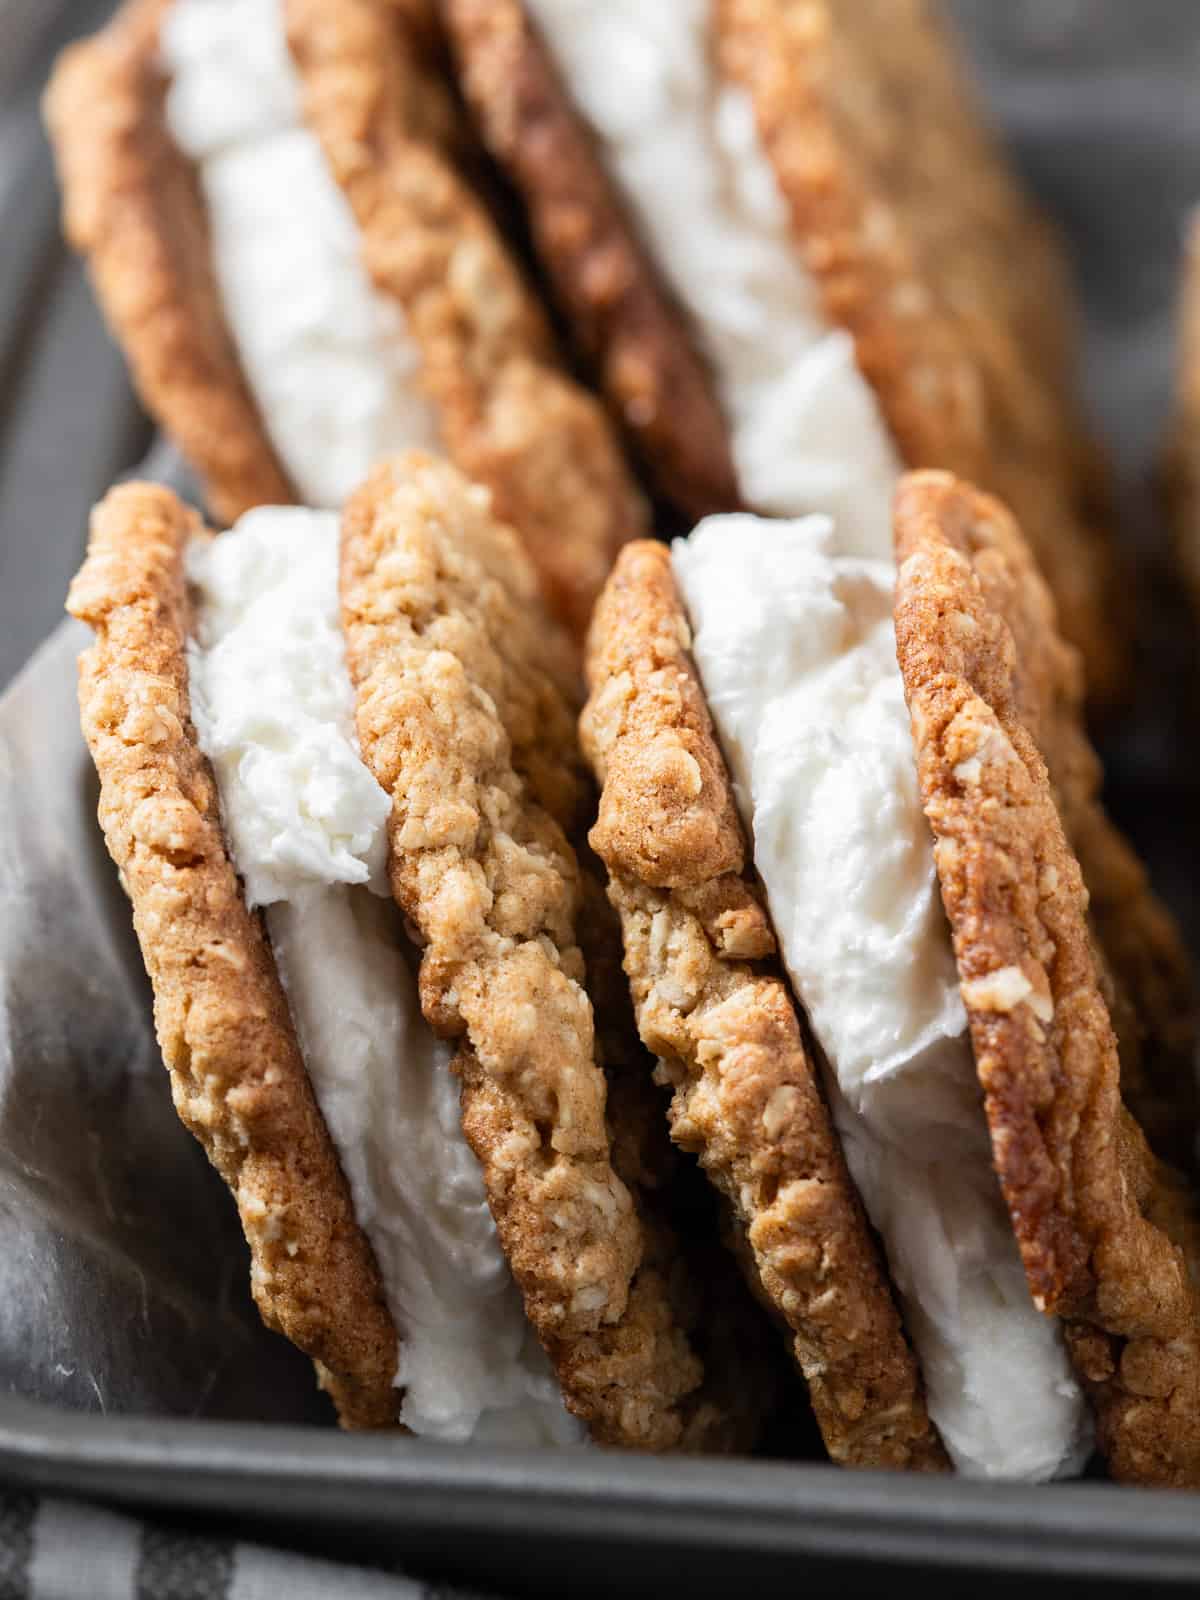 two oatmeal cream pies leaning up against the side of a metal pan.